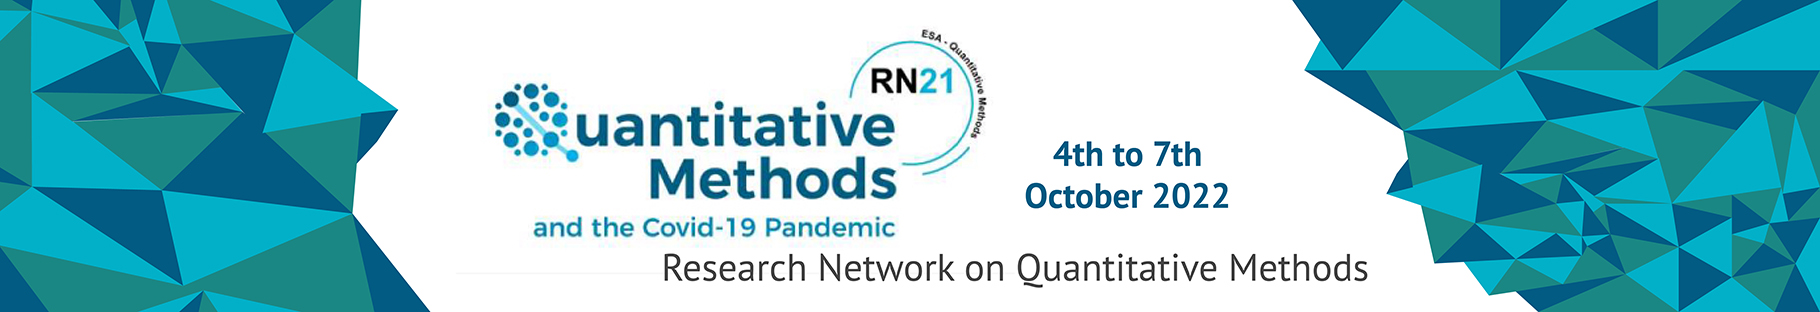 RN21 conference